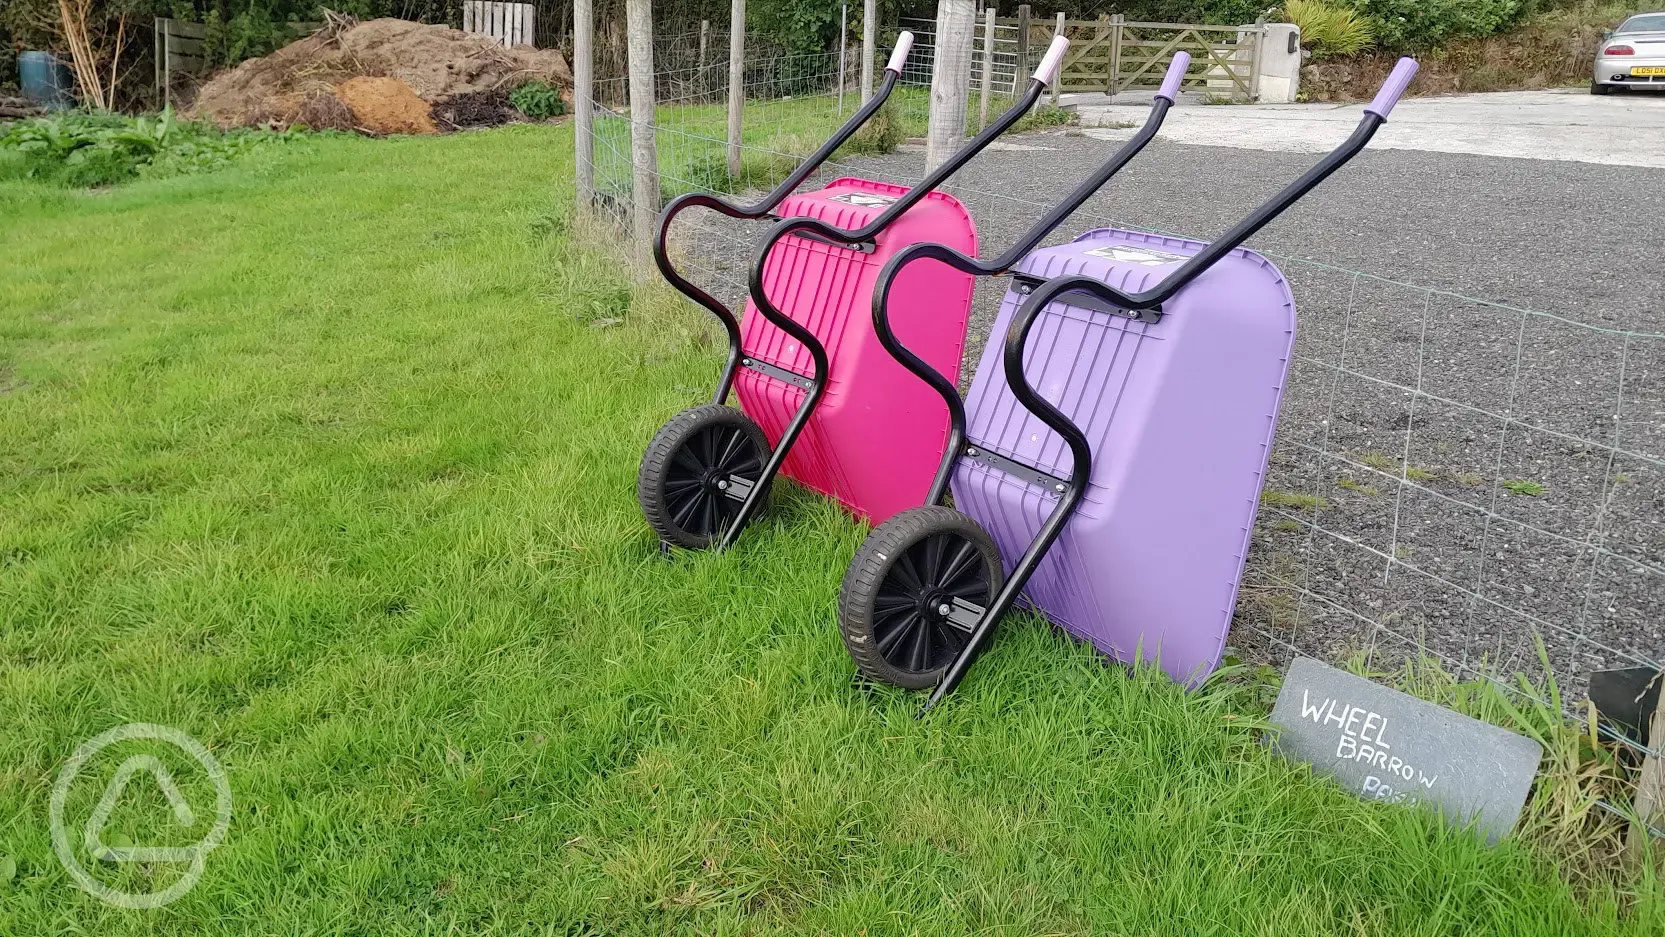 Wheelbarrows for your luggage